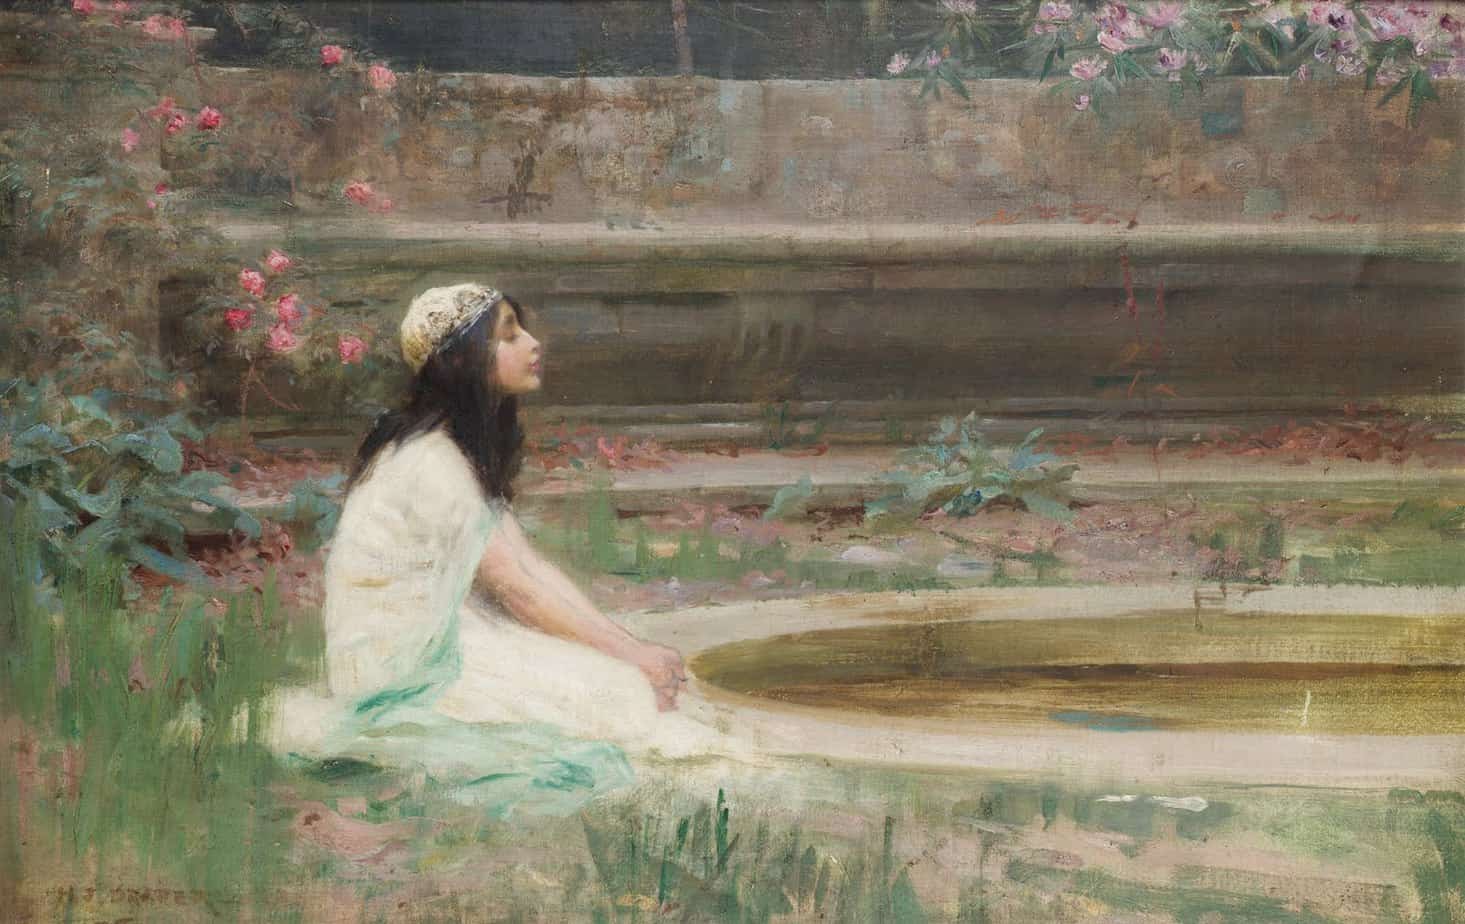 Herbert Draper - A Young Girl by a Pool